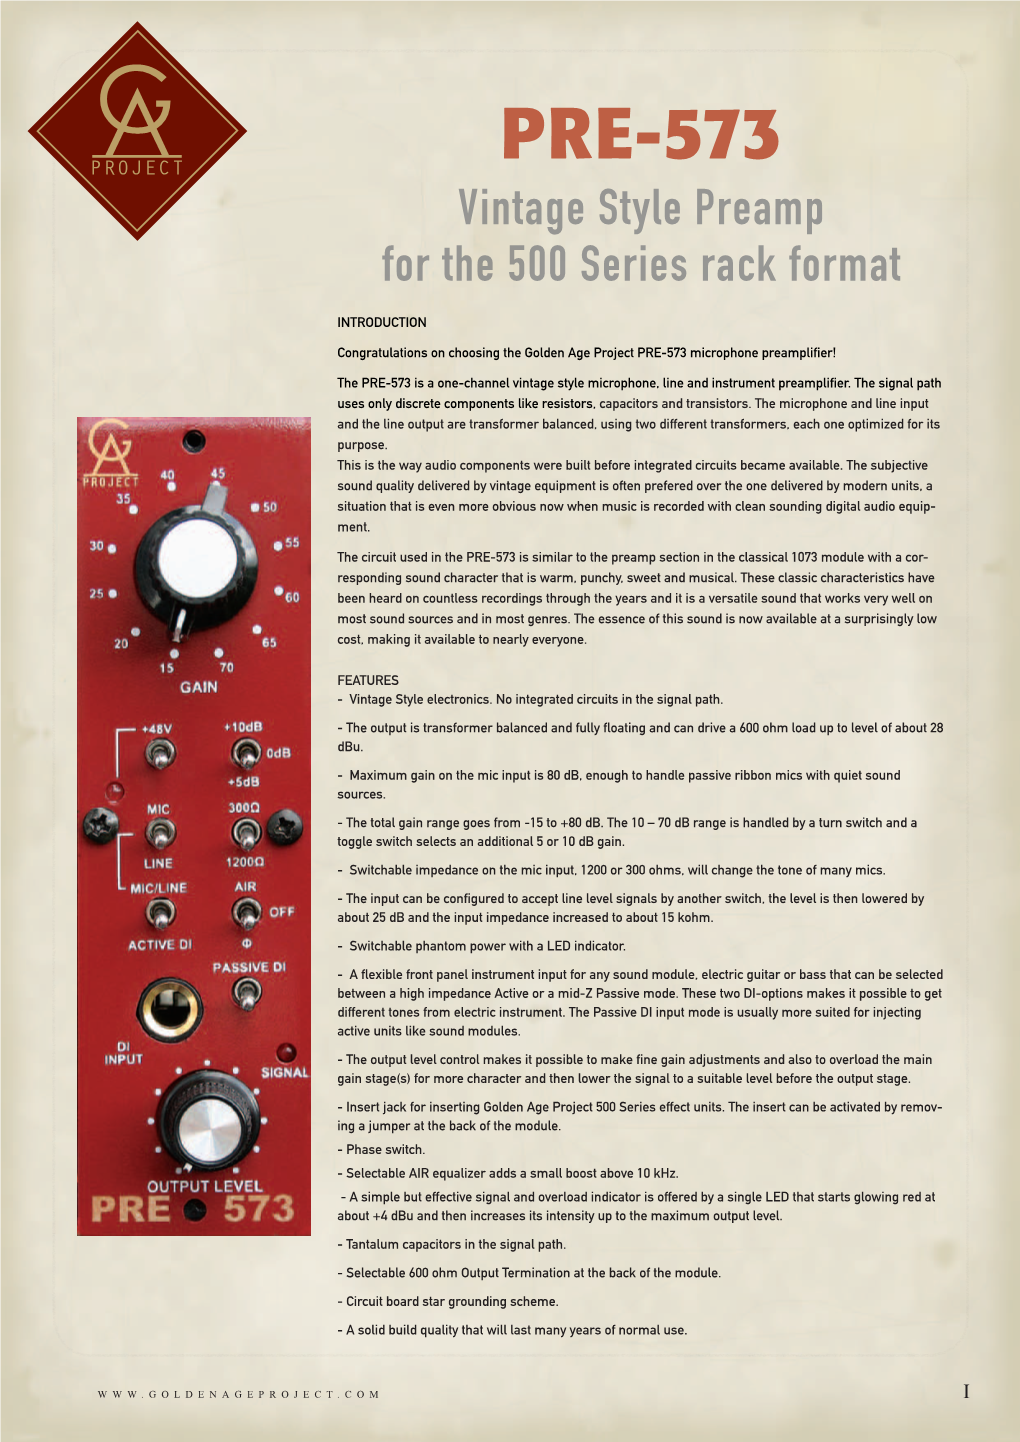 PRE-573 Vintage Style Preamp for the 500 Series Rack Format